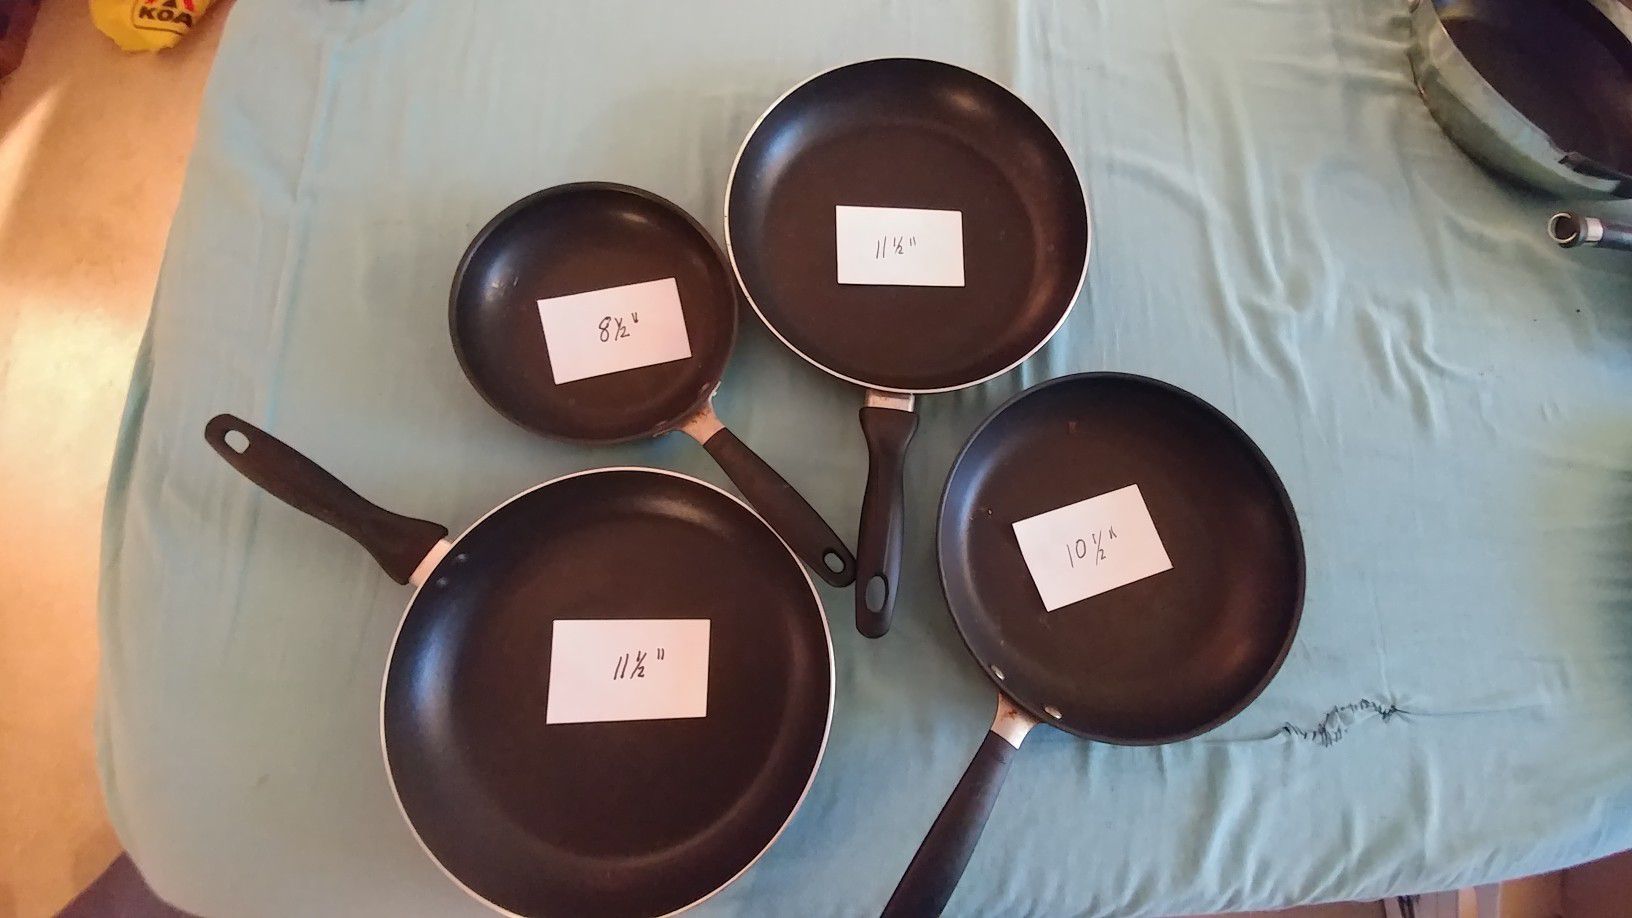 4 Good Size "non-stick" Cooking Pans. Gently used.